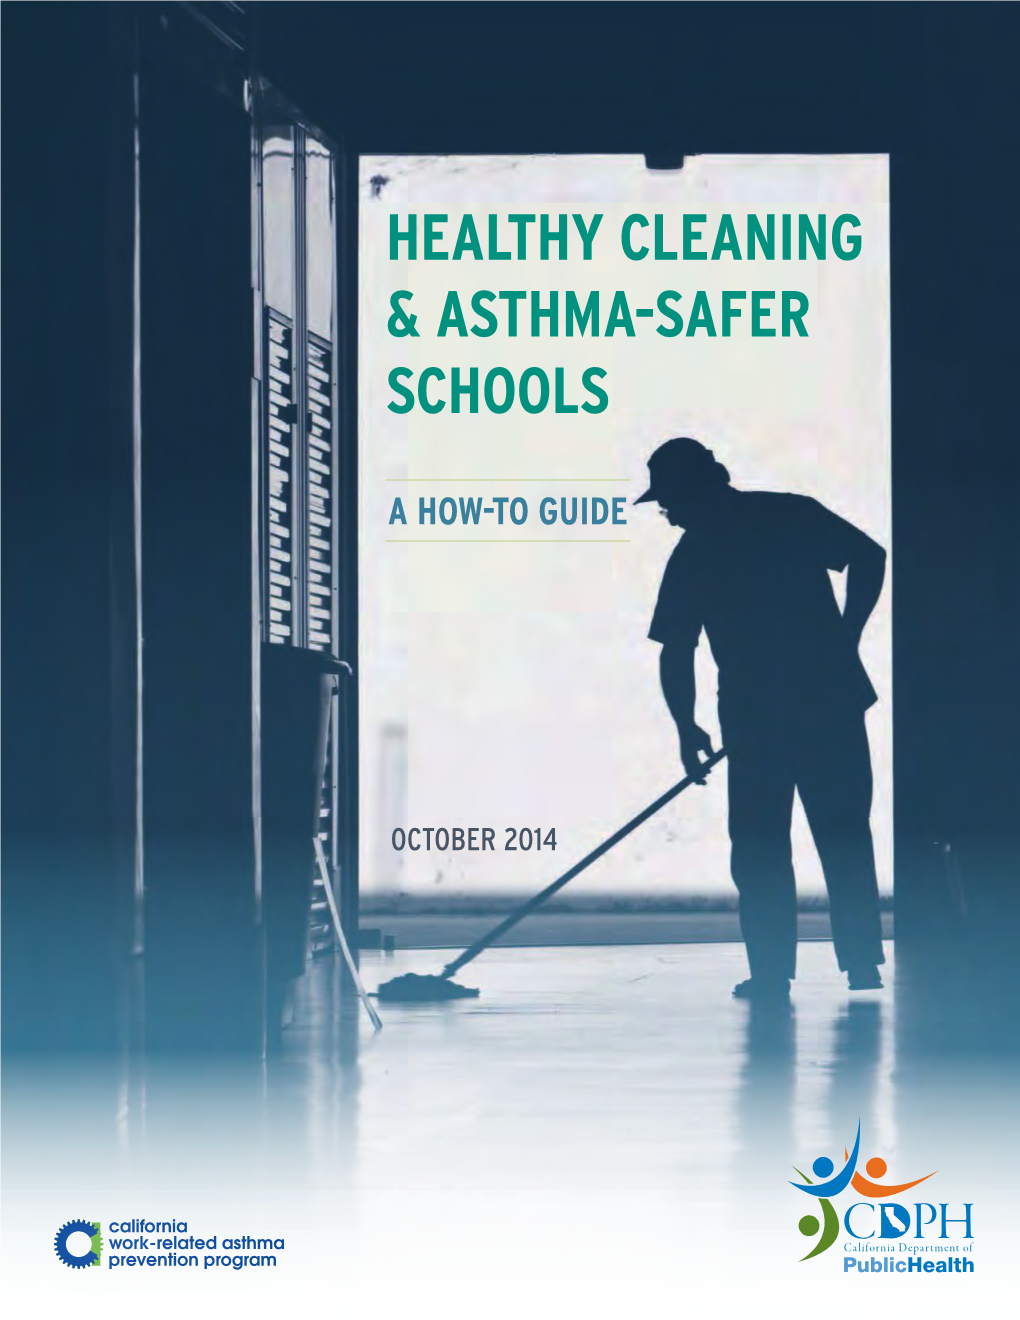 Healthy Cleaning & Asthma-Safer Schools a How-To Guide